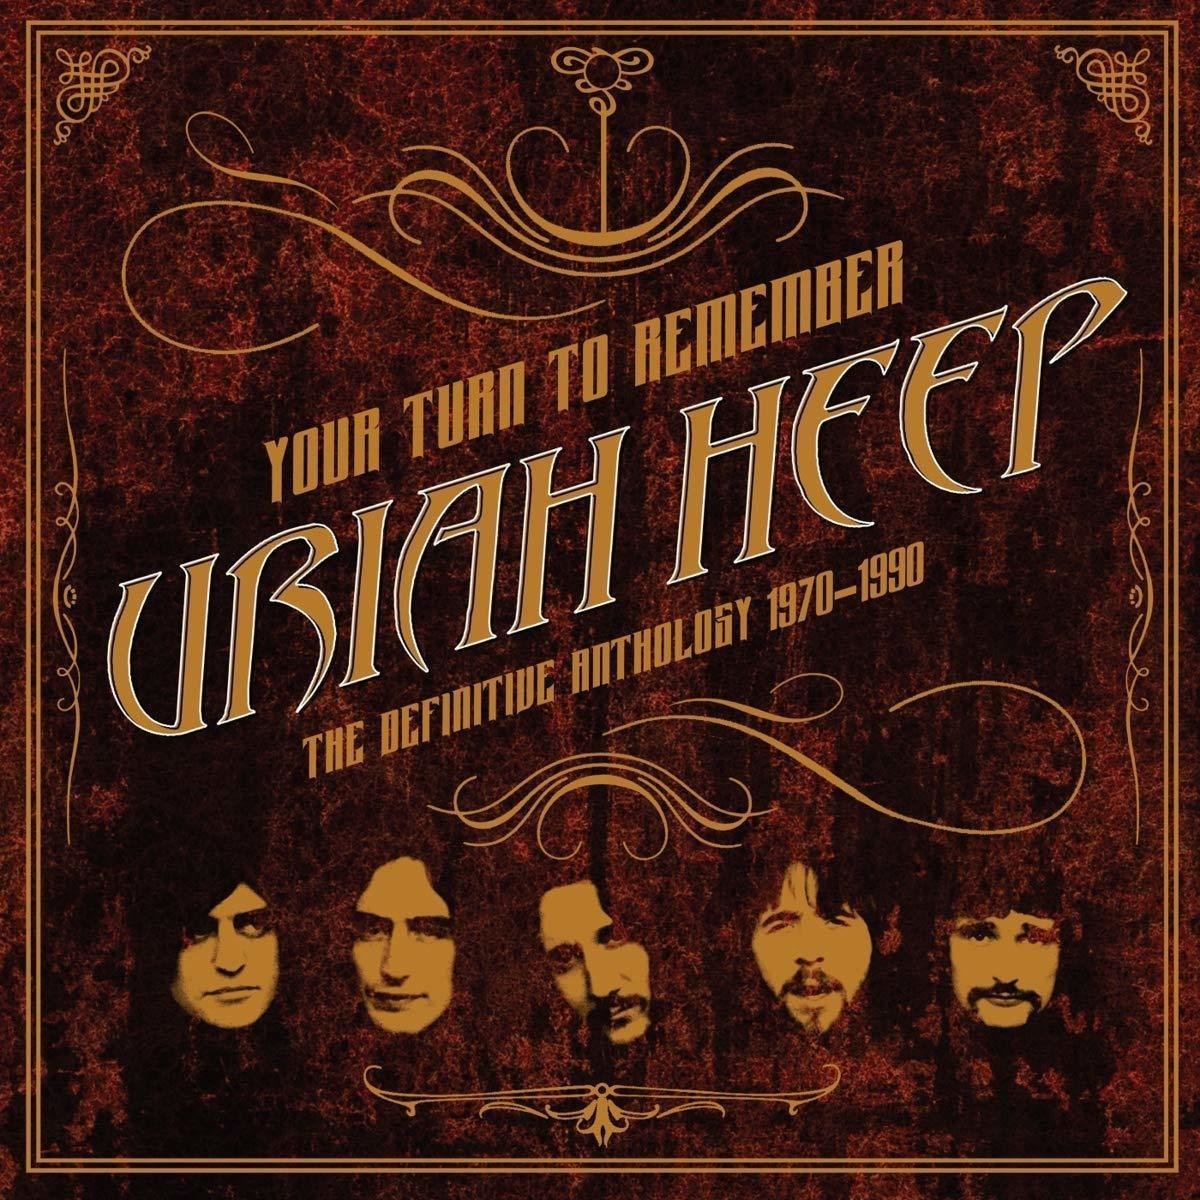 Vinyl Record Uriah Heep - Your Turn To Remember: The Definitive Anthology 1970-1990 (LP)